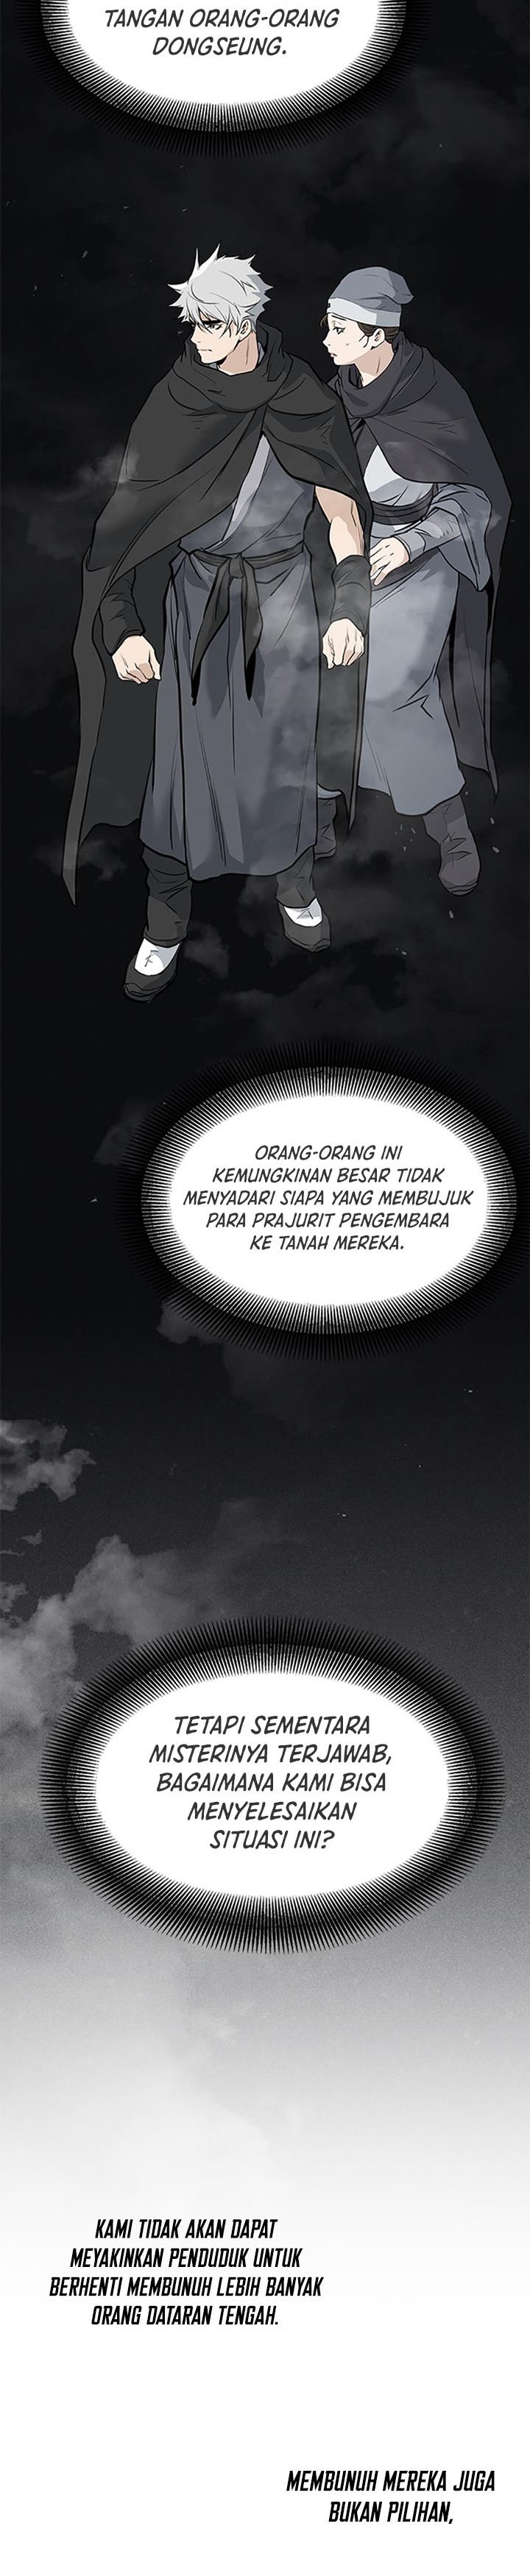 Grand General Chapter 66